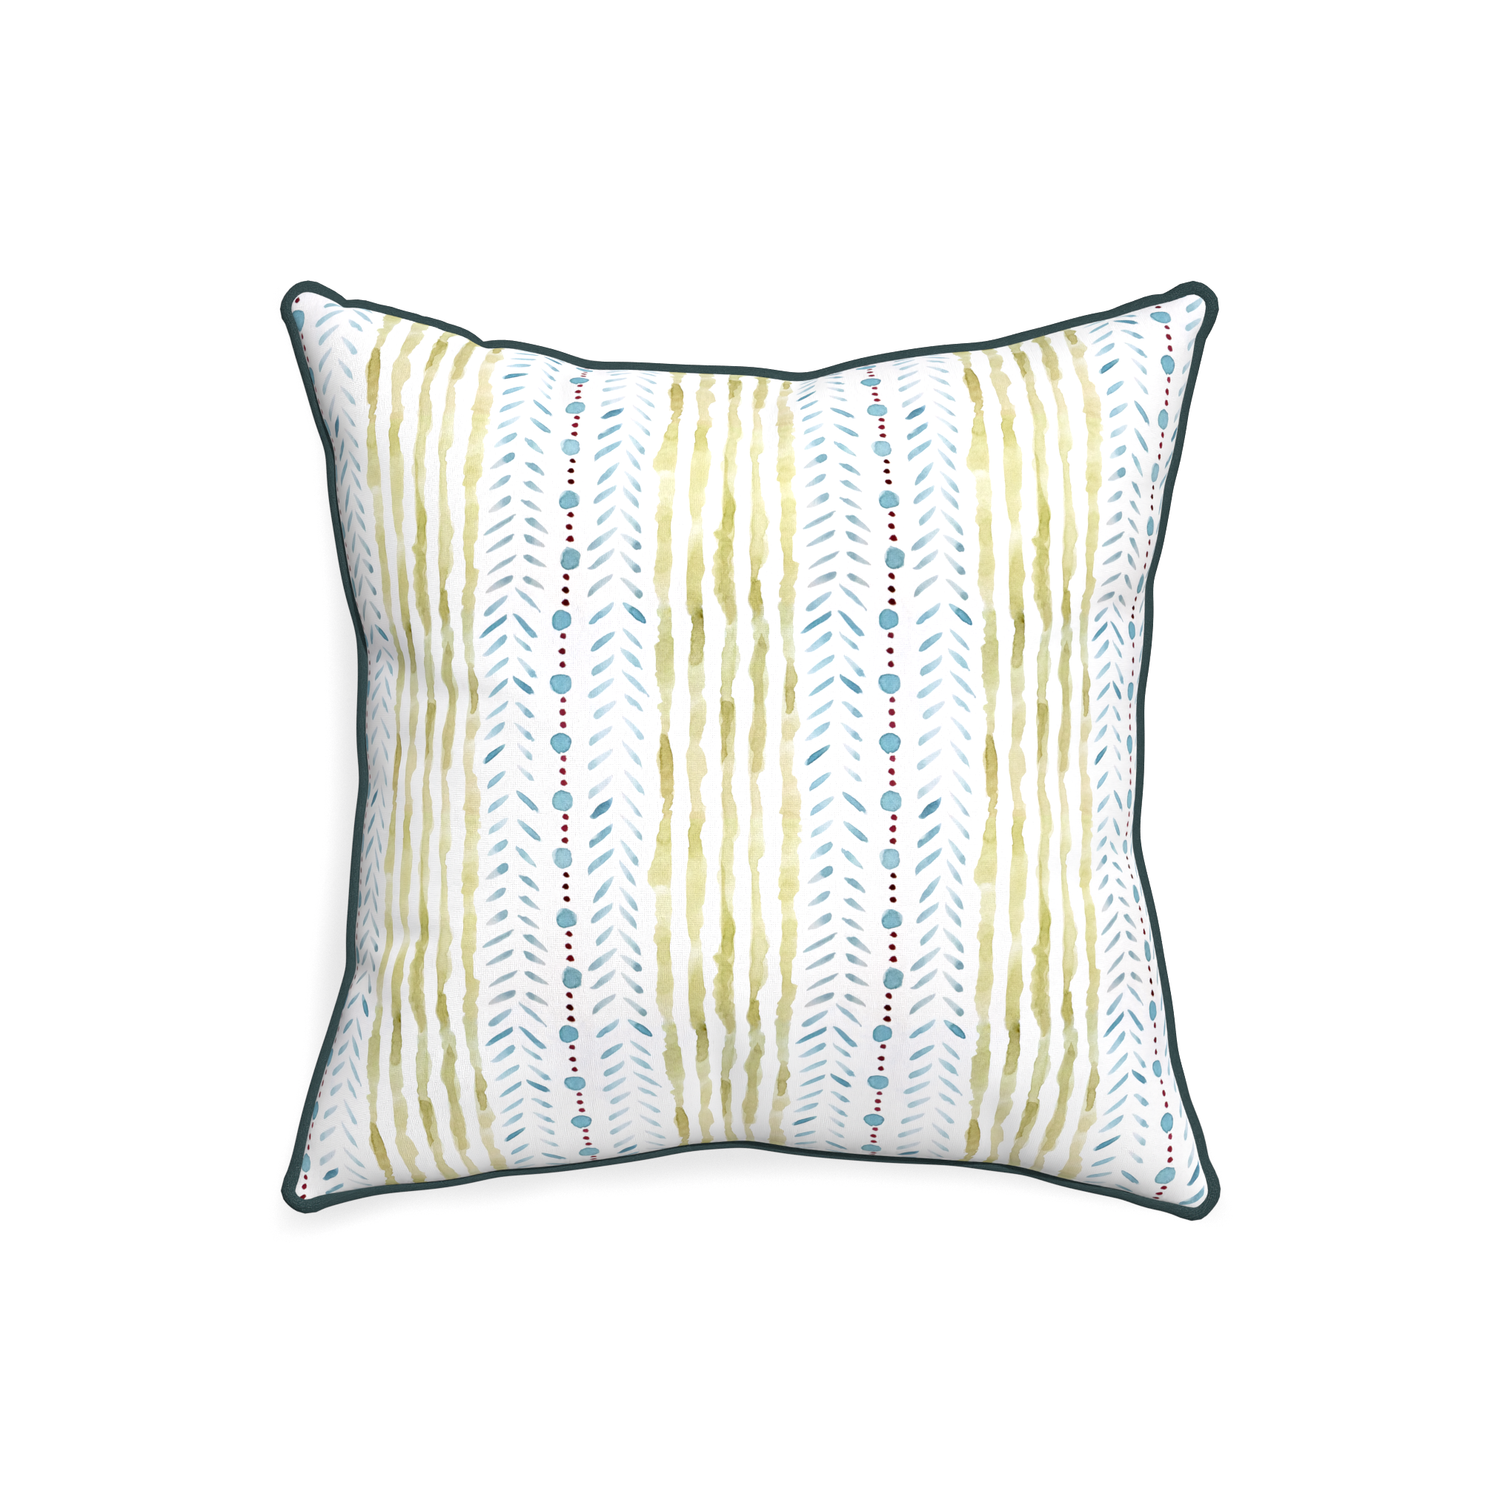 20-square julia custom blue & green stripedpillow with p piping on white background